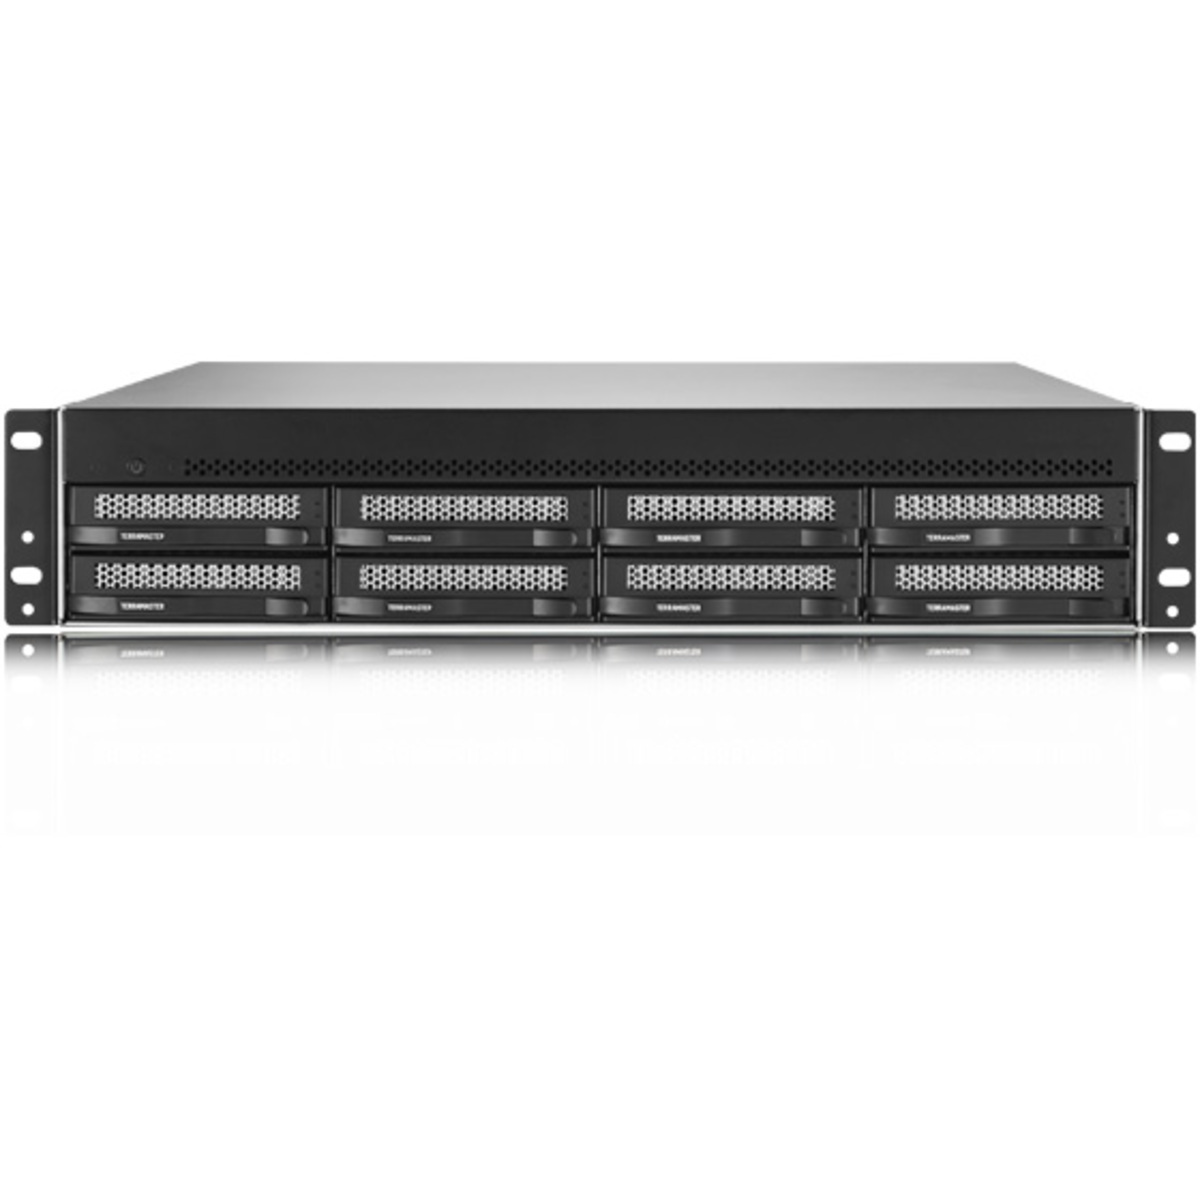 TerraMaster U8-450 144tb 8-Bay RackMount Multimedia / Power User / Business NAS - Network Attached Storage Device 6x24tb Seagate IronWolf Pro ST24000NT002 3.5 7200rpm SATA 6Gb/s HDD NAS Class Drives Installed - Burn-In Tested U8-450